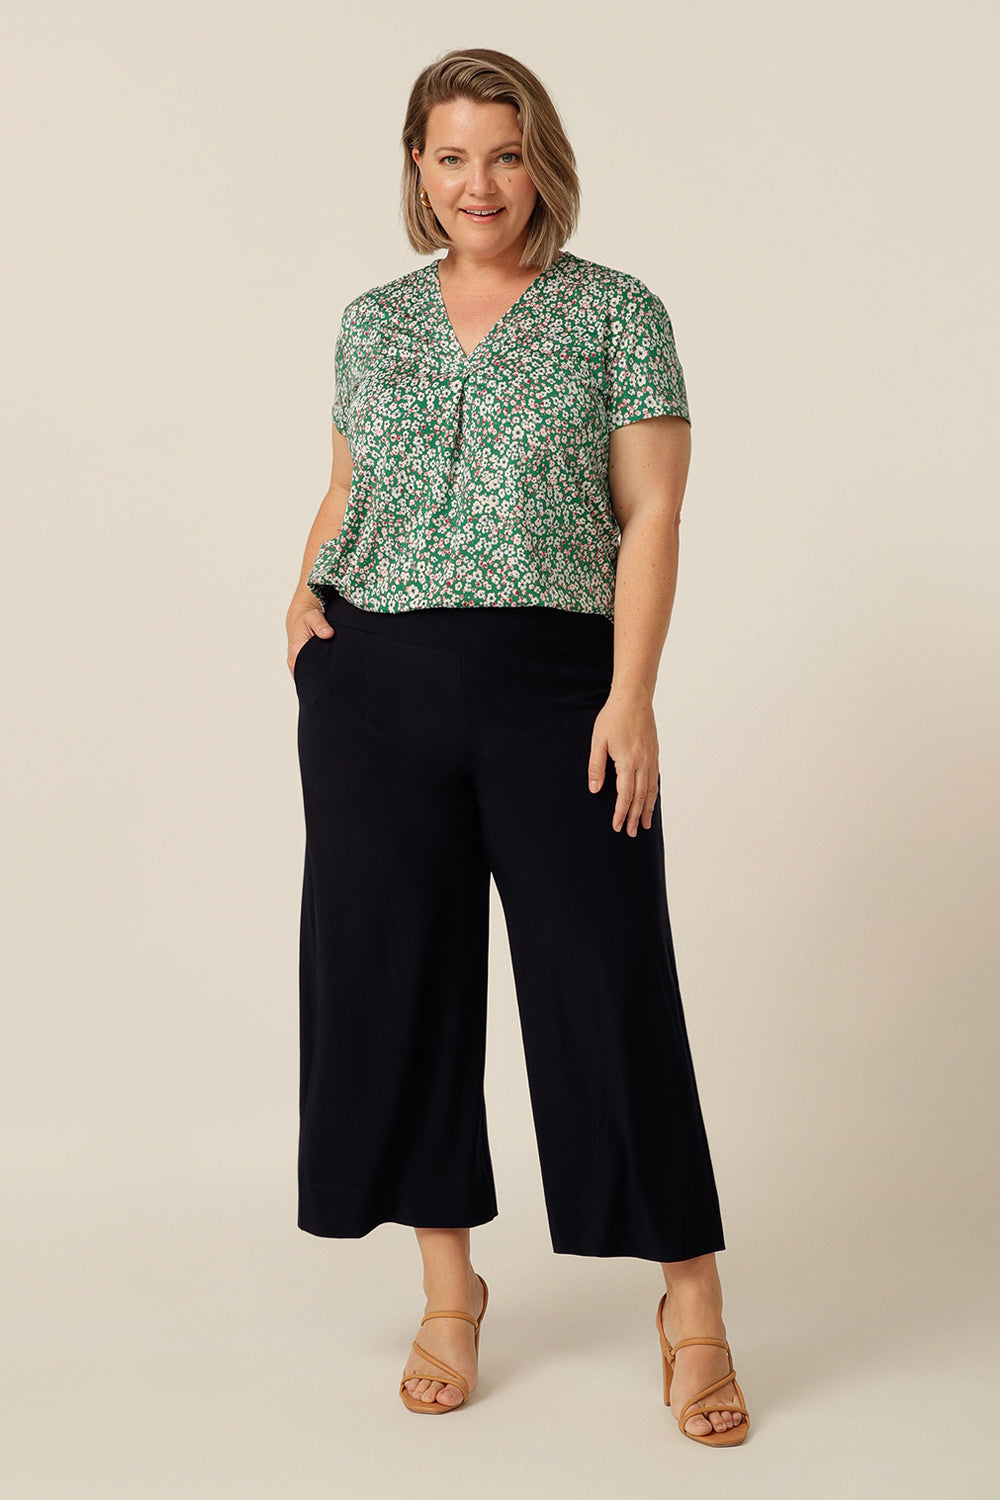 versatile tailored T-shirt top with v-neckline and short sleeves - a great top for work wear and corporate wardrobes!  Made in Australia for petite to plus size women.